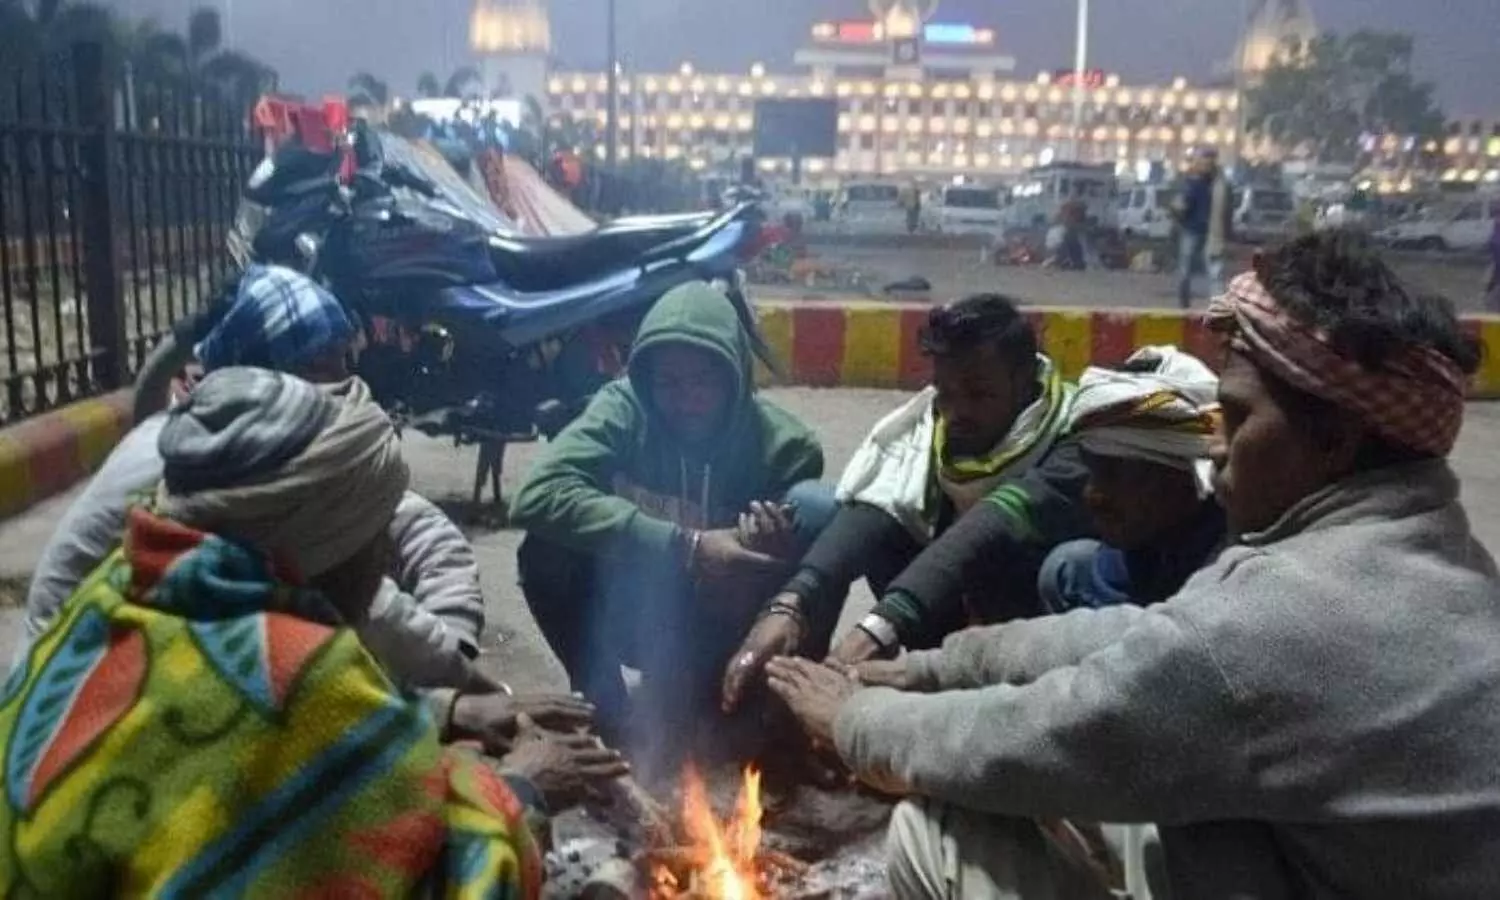 jaunpur temperature reached 4.6 degree people are saving lives by lighting bonfires